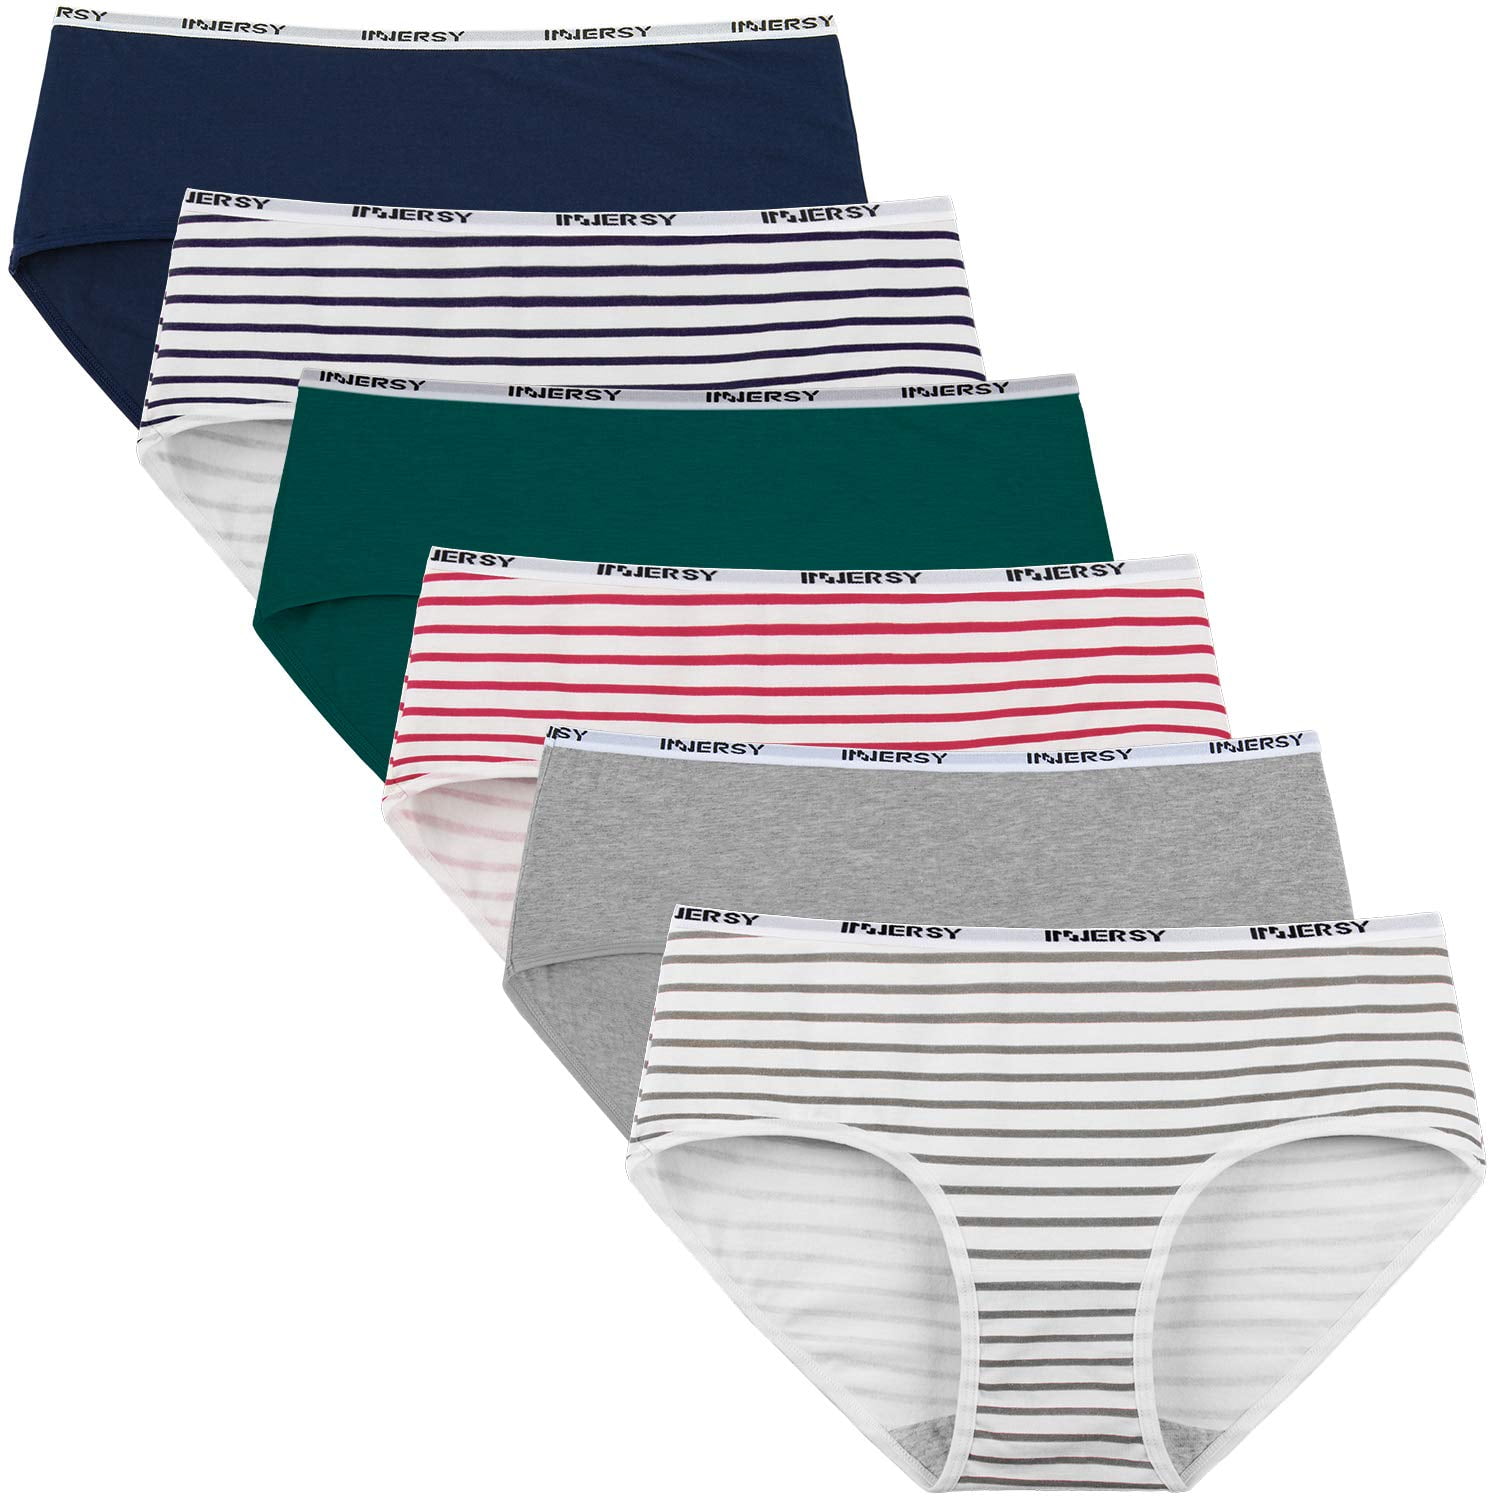 INNERSY Womens Underwear Cotton Hipster Panties Low Rise Basics Underwear  6-Pack (X-Small, Sport Stripes) 